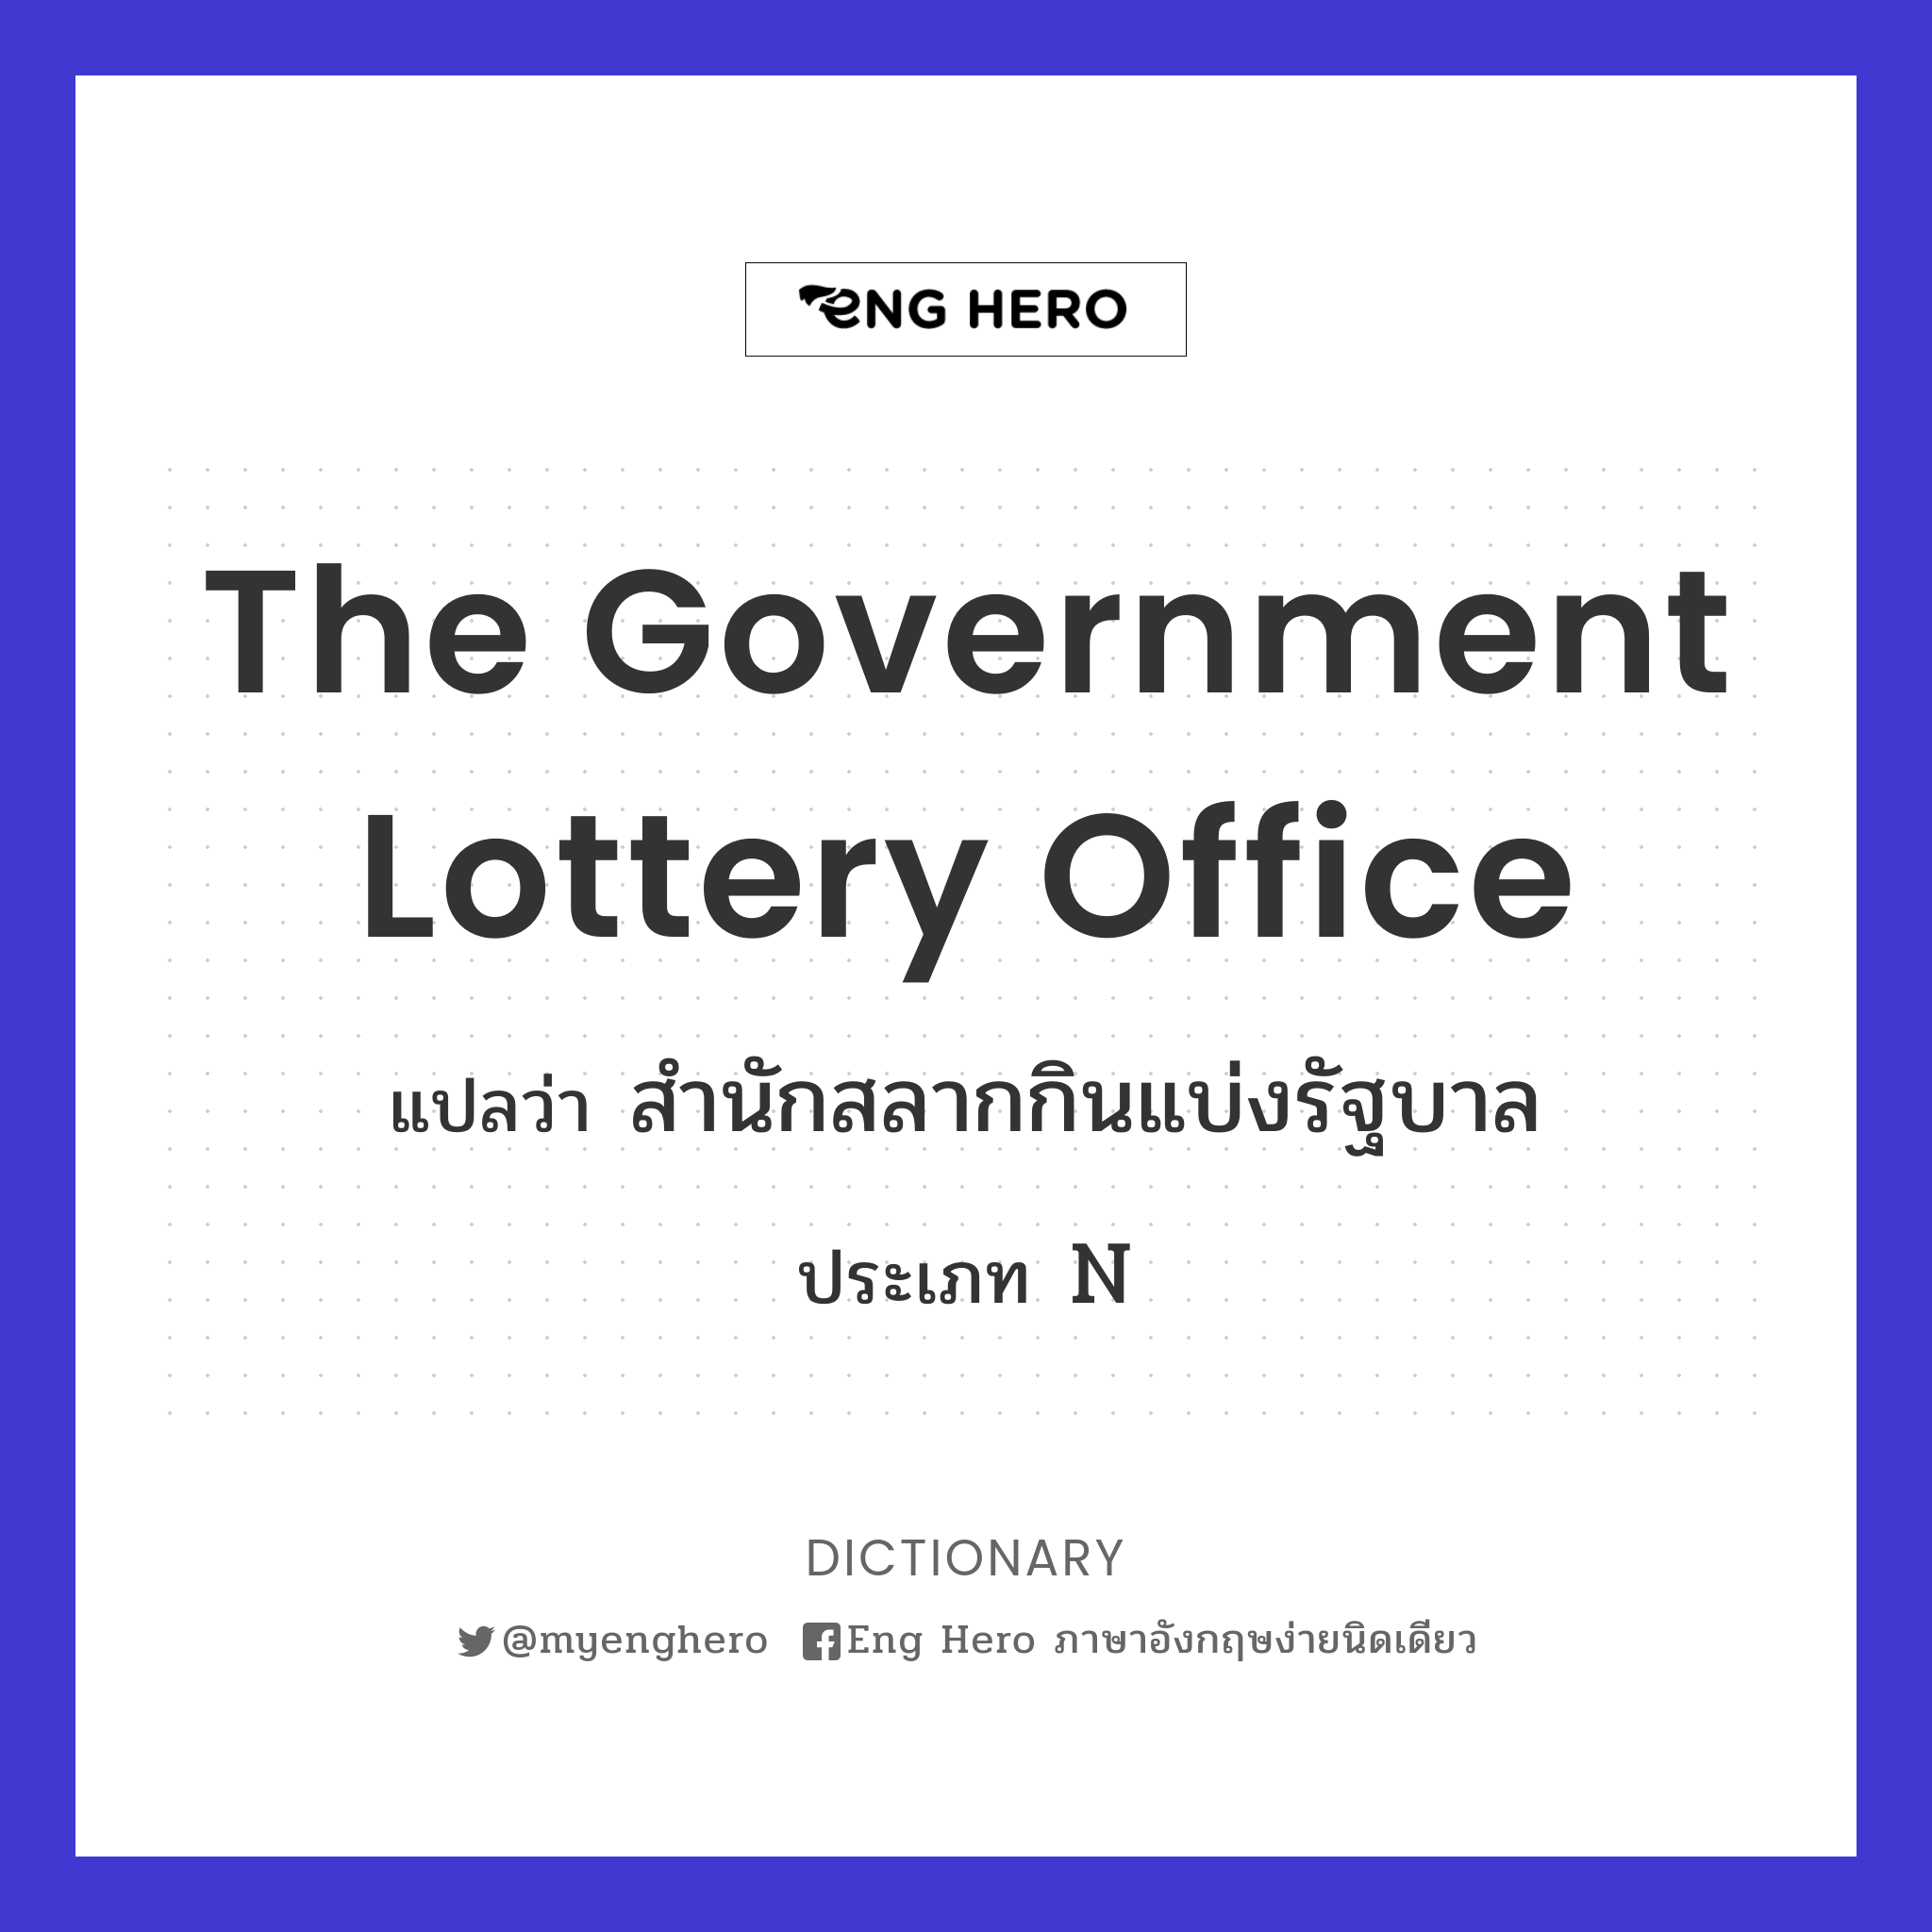 The Government Lottery Office